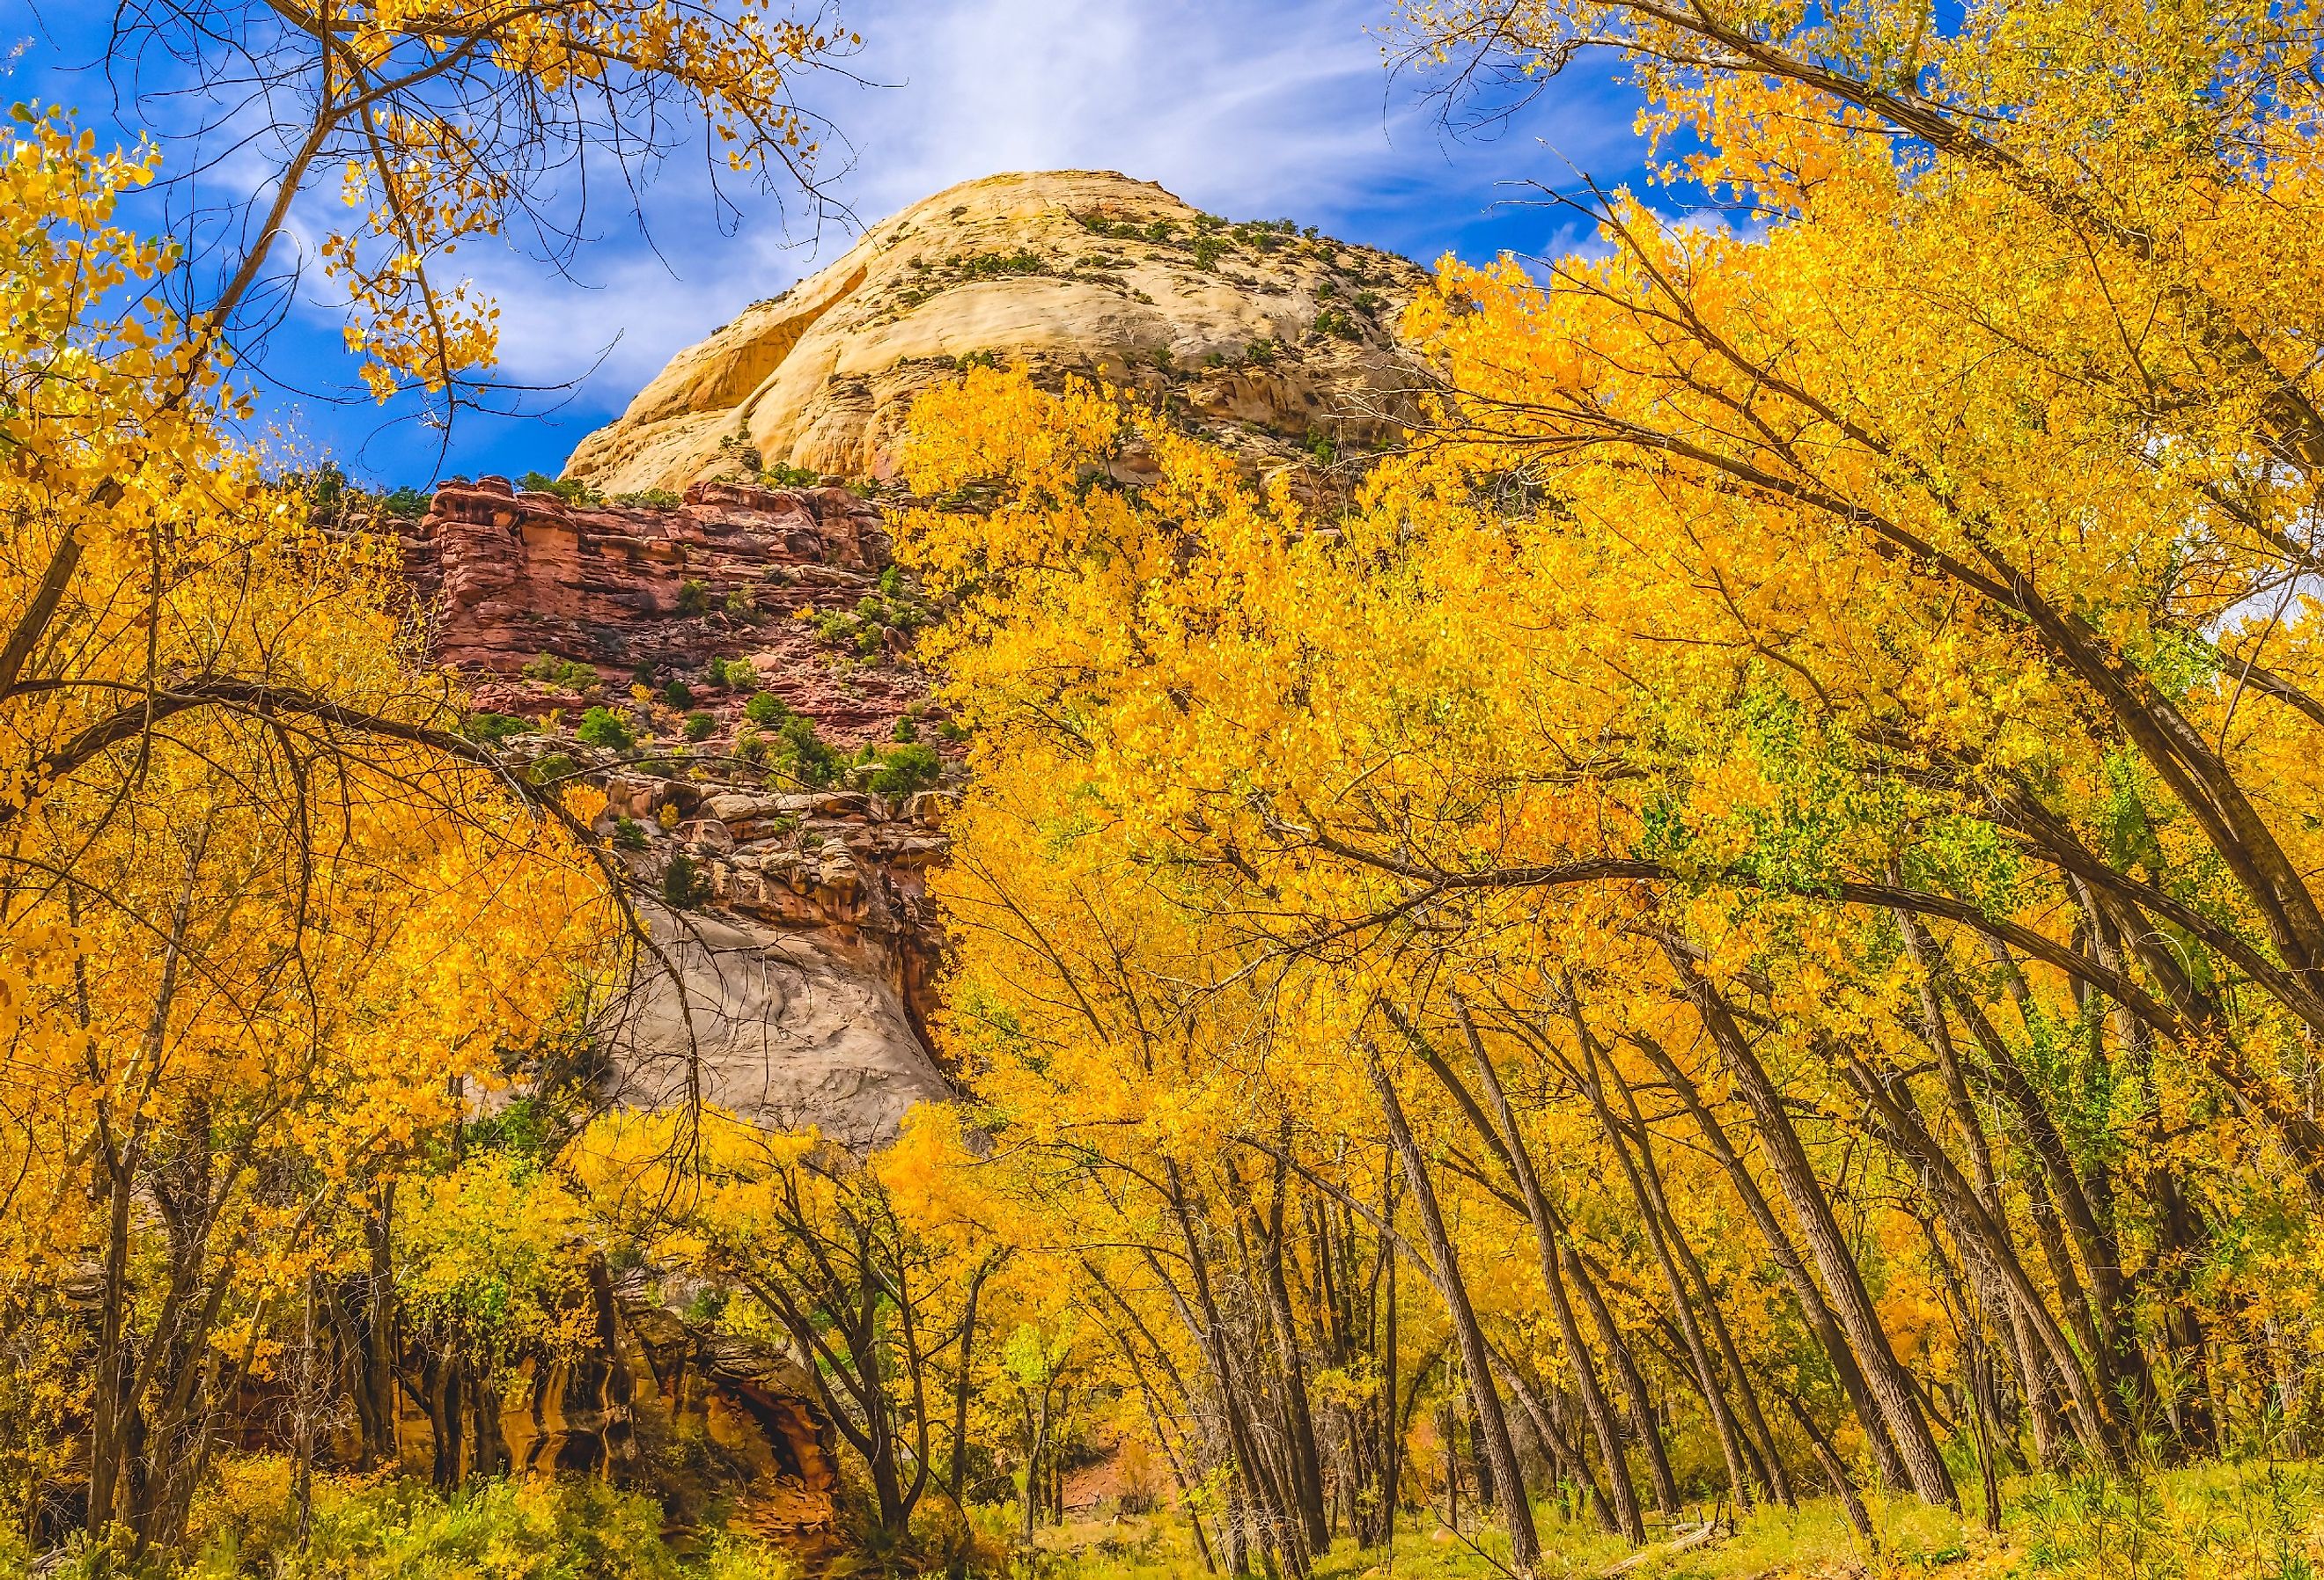 Colorful yellow cottonwood trees in autumn, Canyonlands National Park, Needles District, near Monticello, Utah.